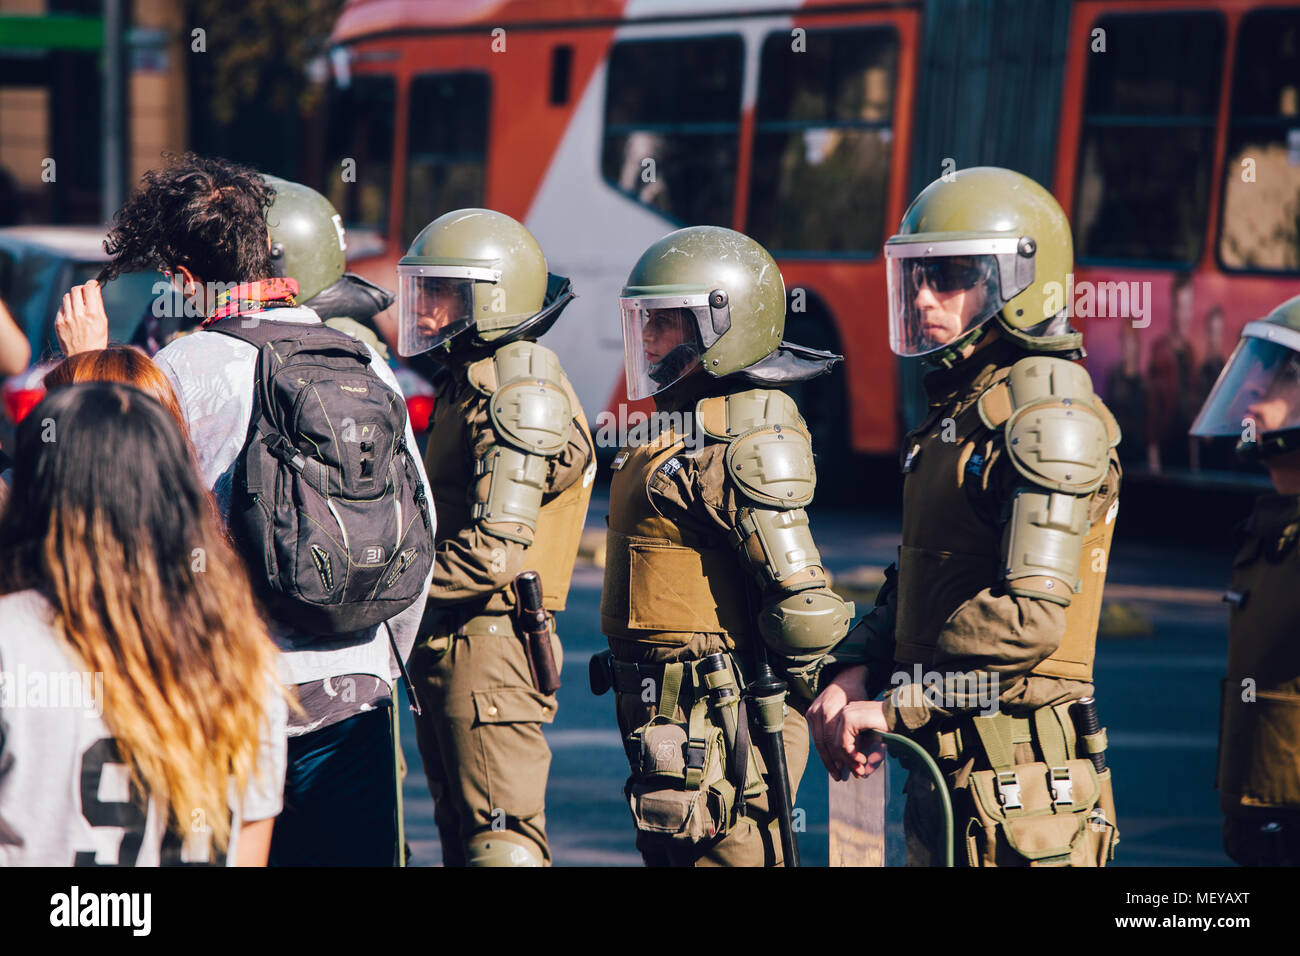 Santiago, Chile - April 19, 2018: A line of Chilean riot police observing protesters during a demonstration in Santiago's Downtown, Chile. Protesters  Stock Photo